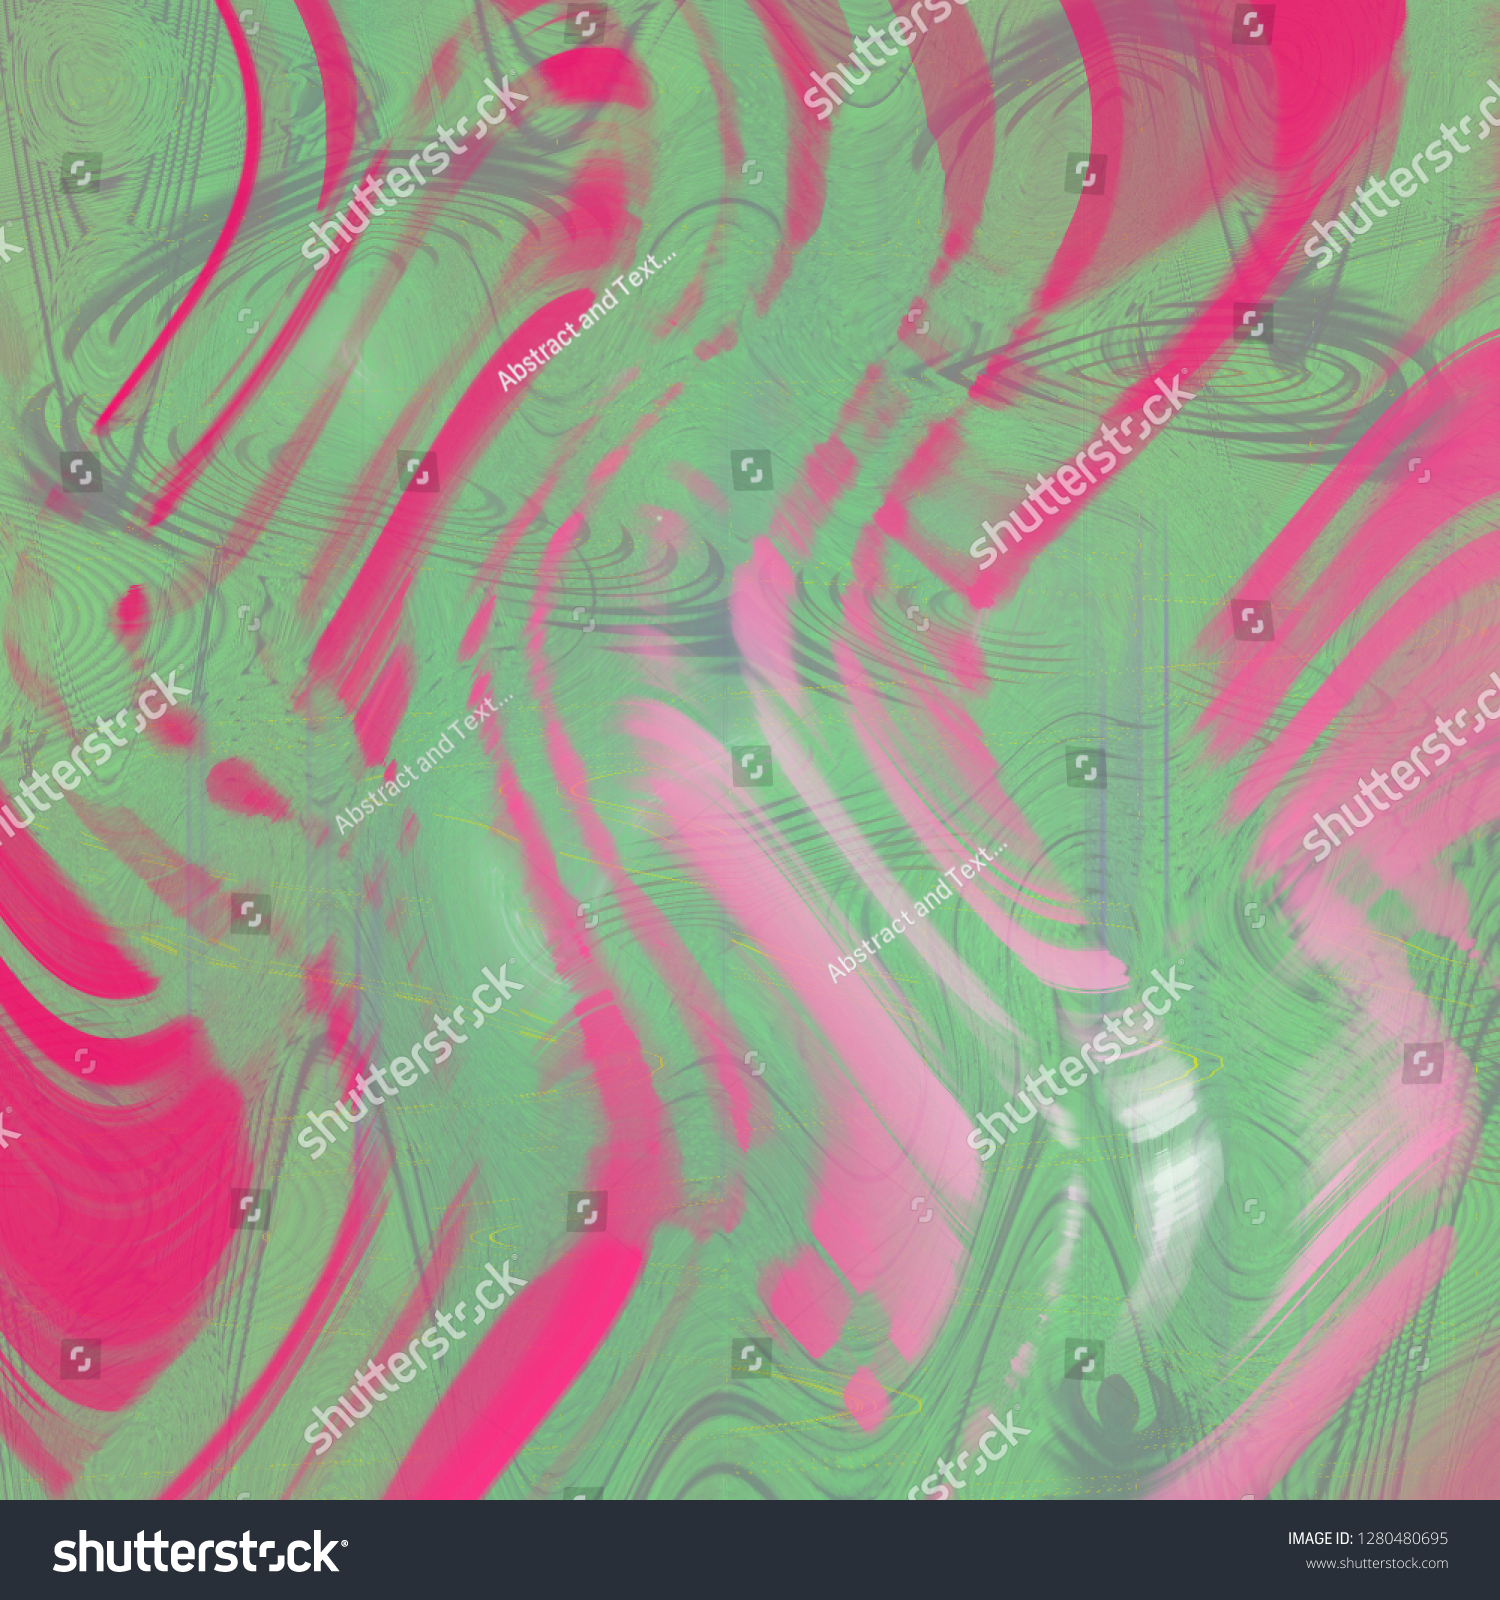 Cool texture pattern and interesting background design artwork. #1280480695